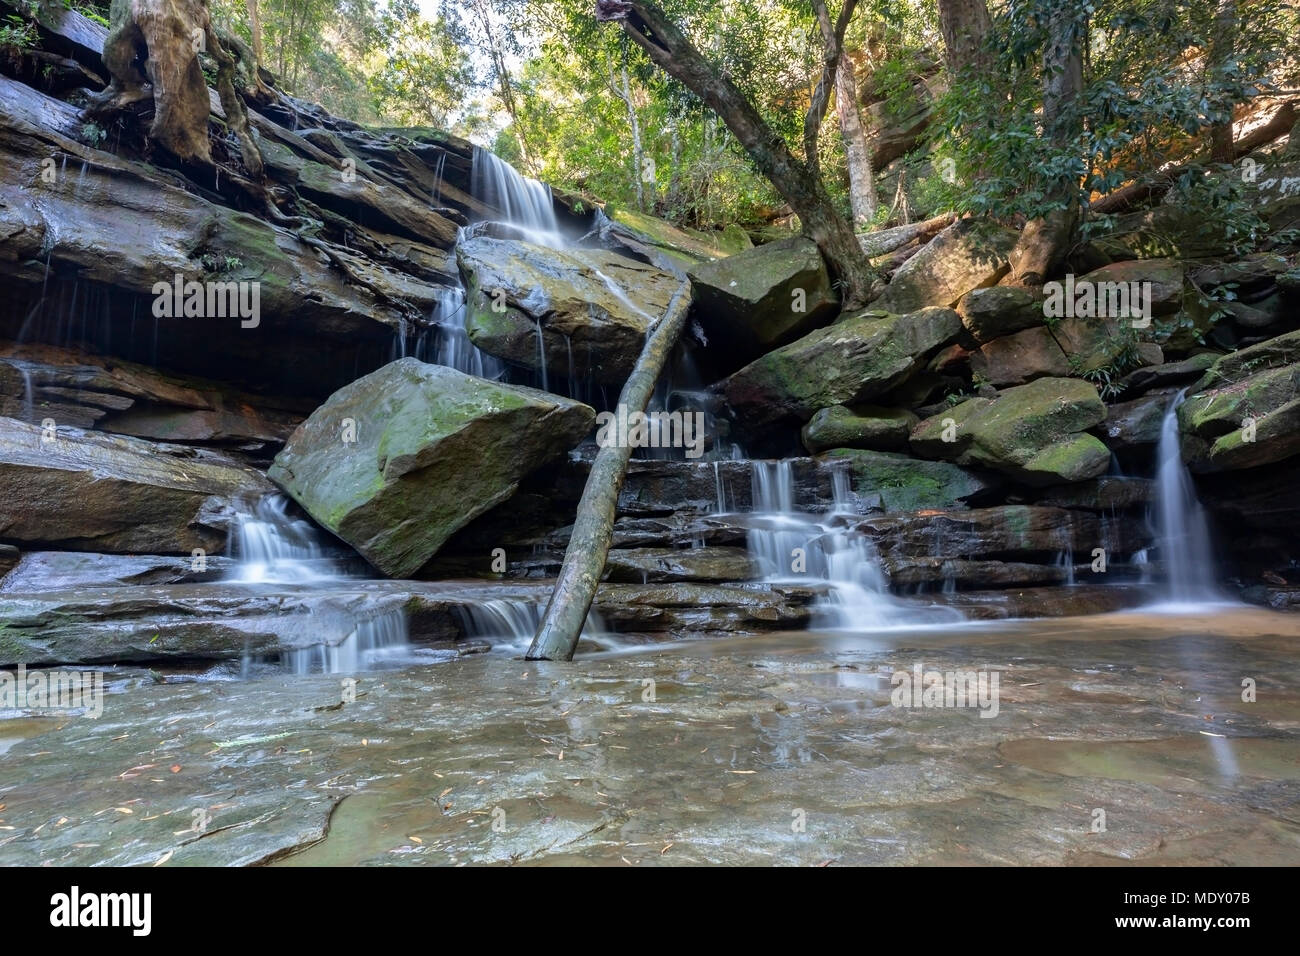 Somersby cascade Falls, Gosford, New South Wales, Australie Banque D'Images